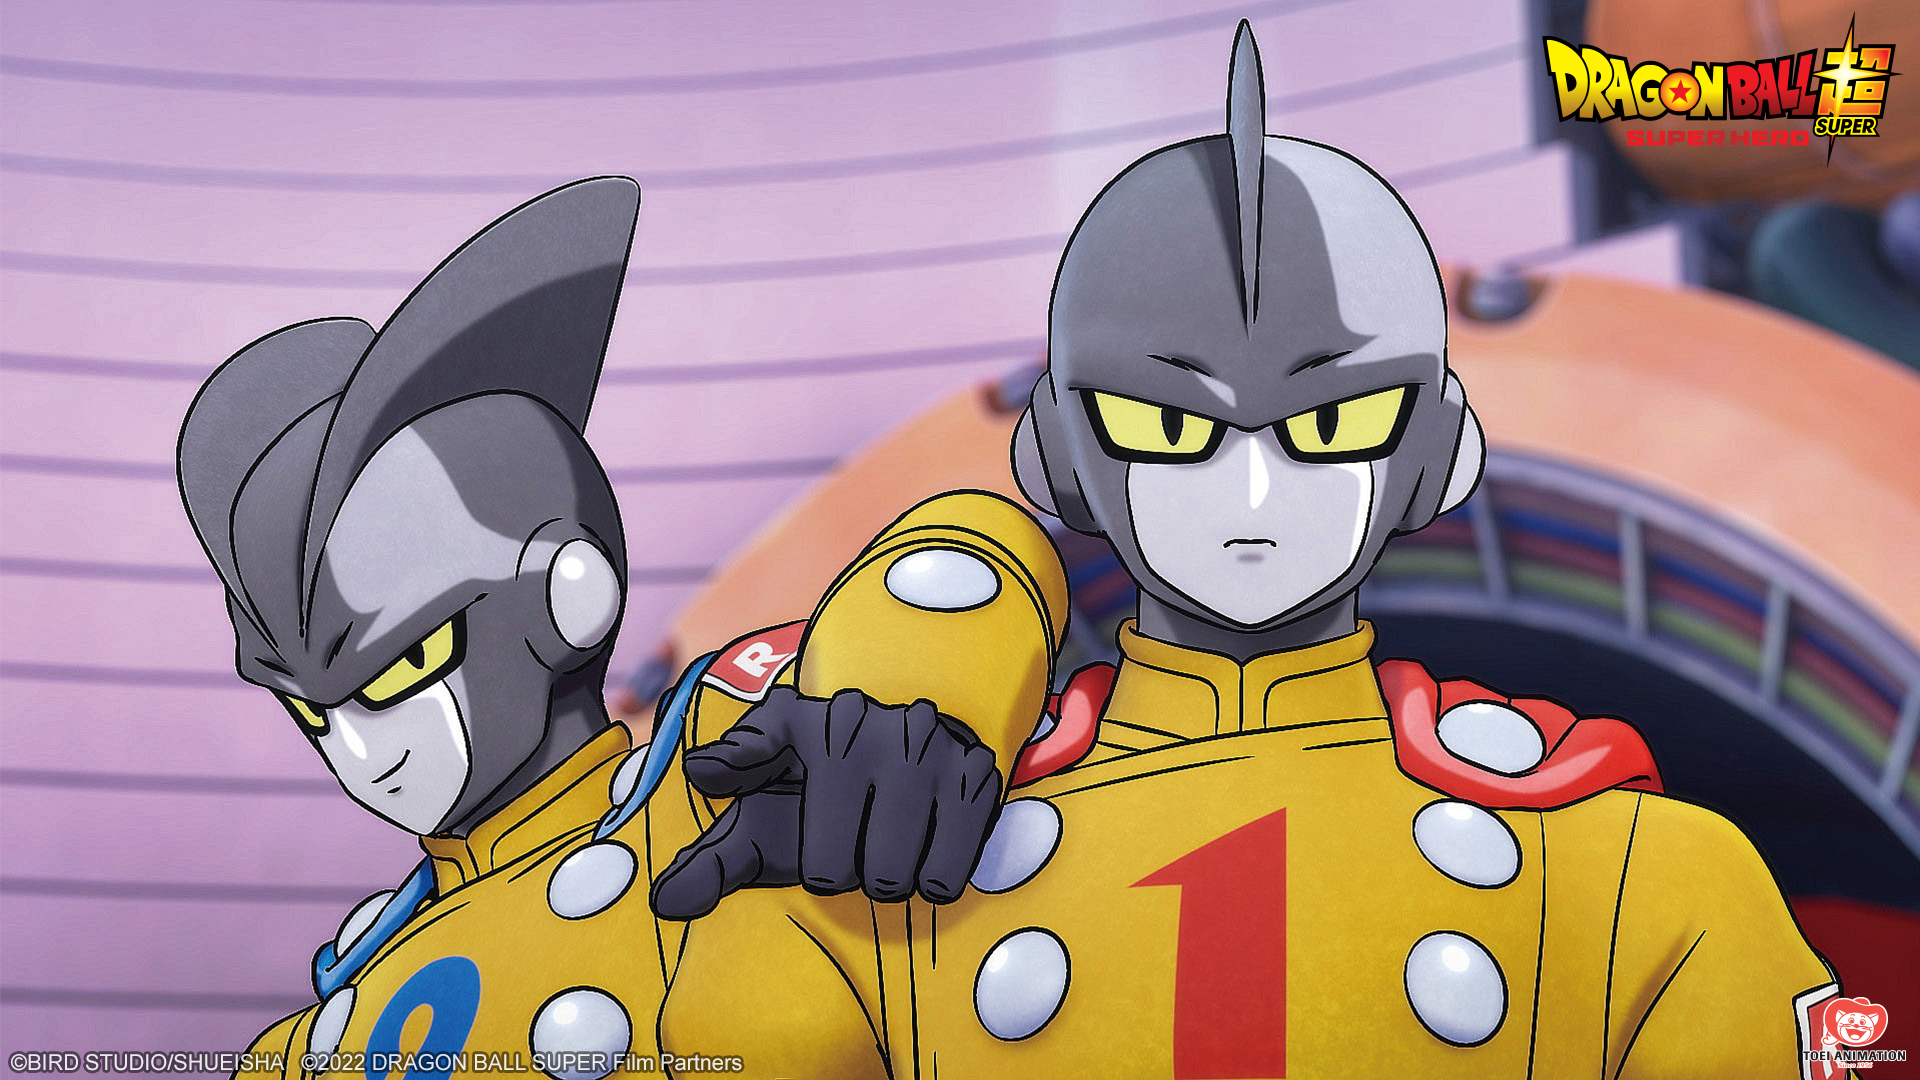 Crunchyroll - INTERVIEW: Dragon Ball Super: SUPER HERO VAs Aleks Le and Zeno  Robinson on the Movie's New Android Duo